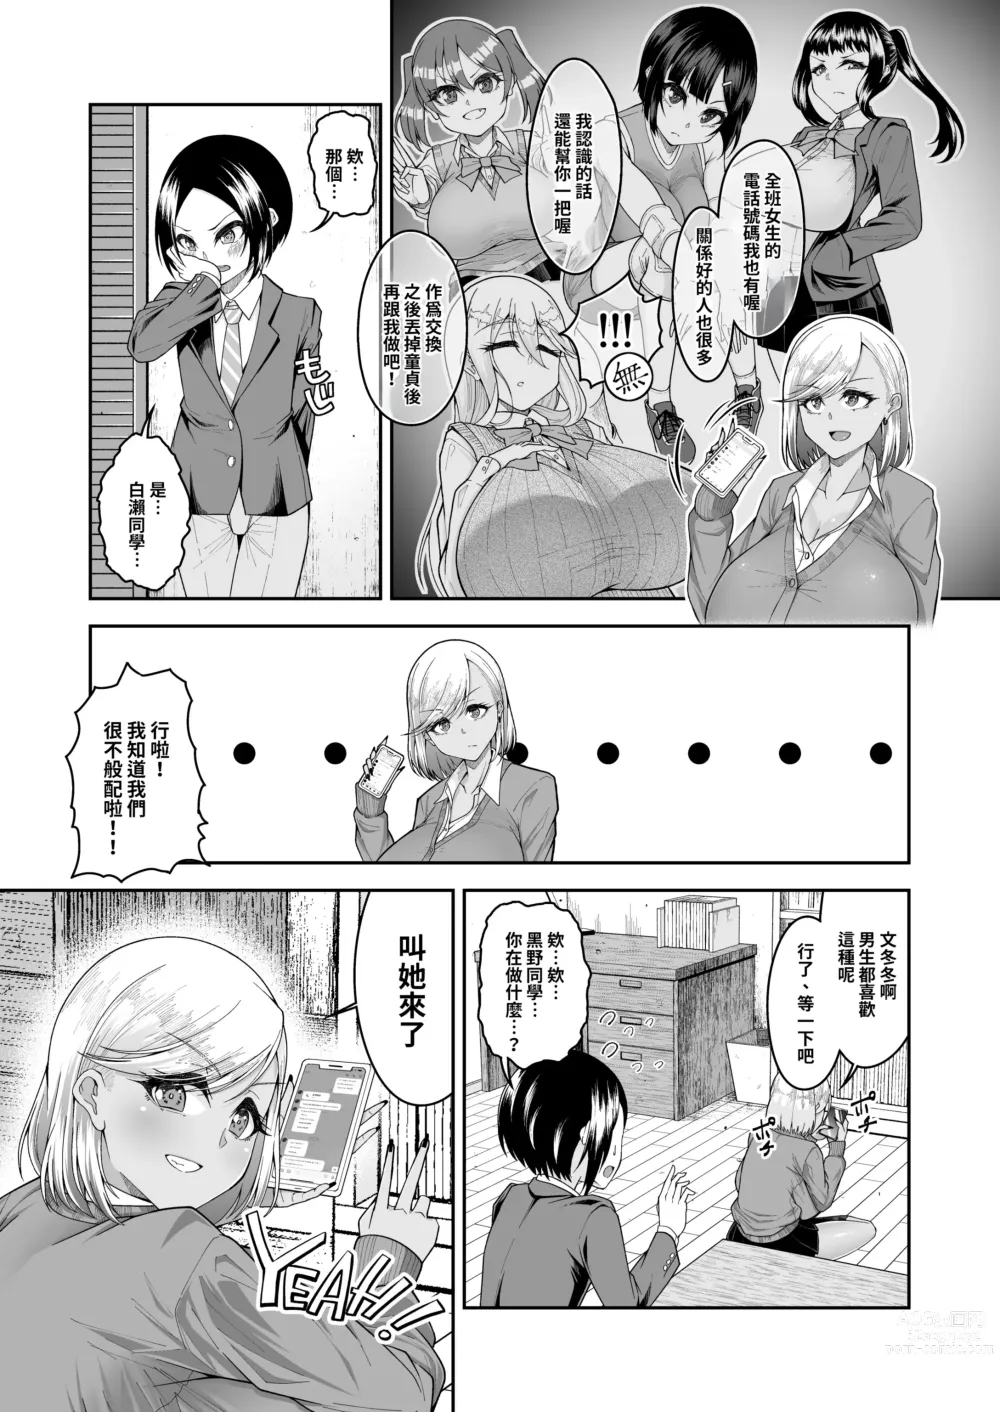 Page 6 of doujinshi 白肉的軟棉與黑肉的軟彈